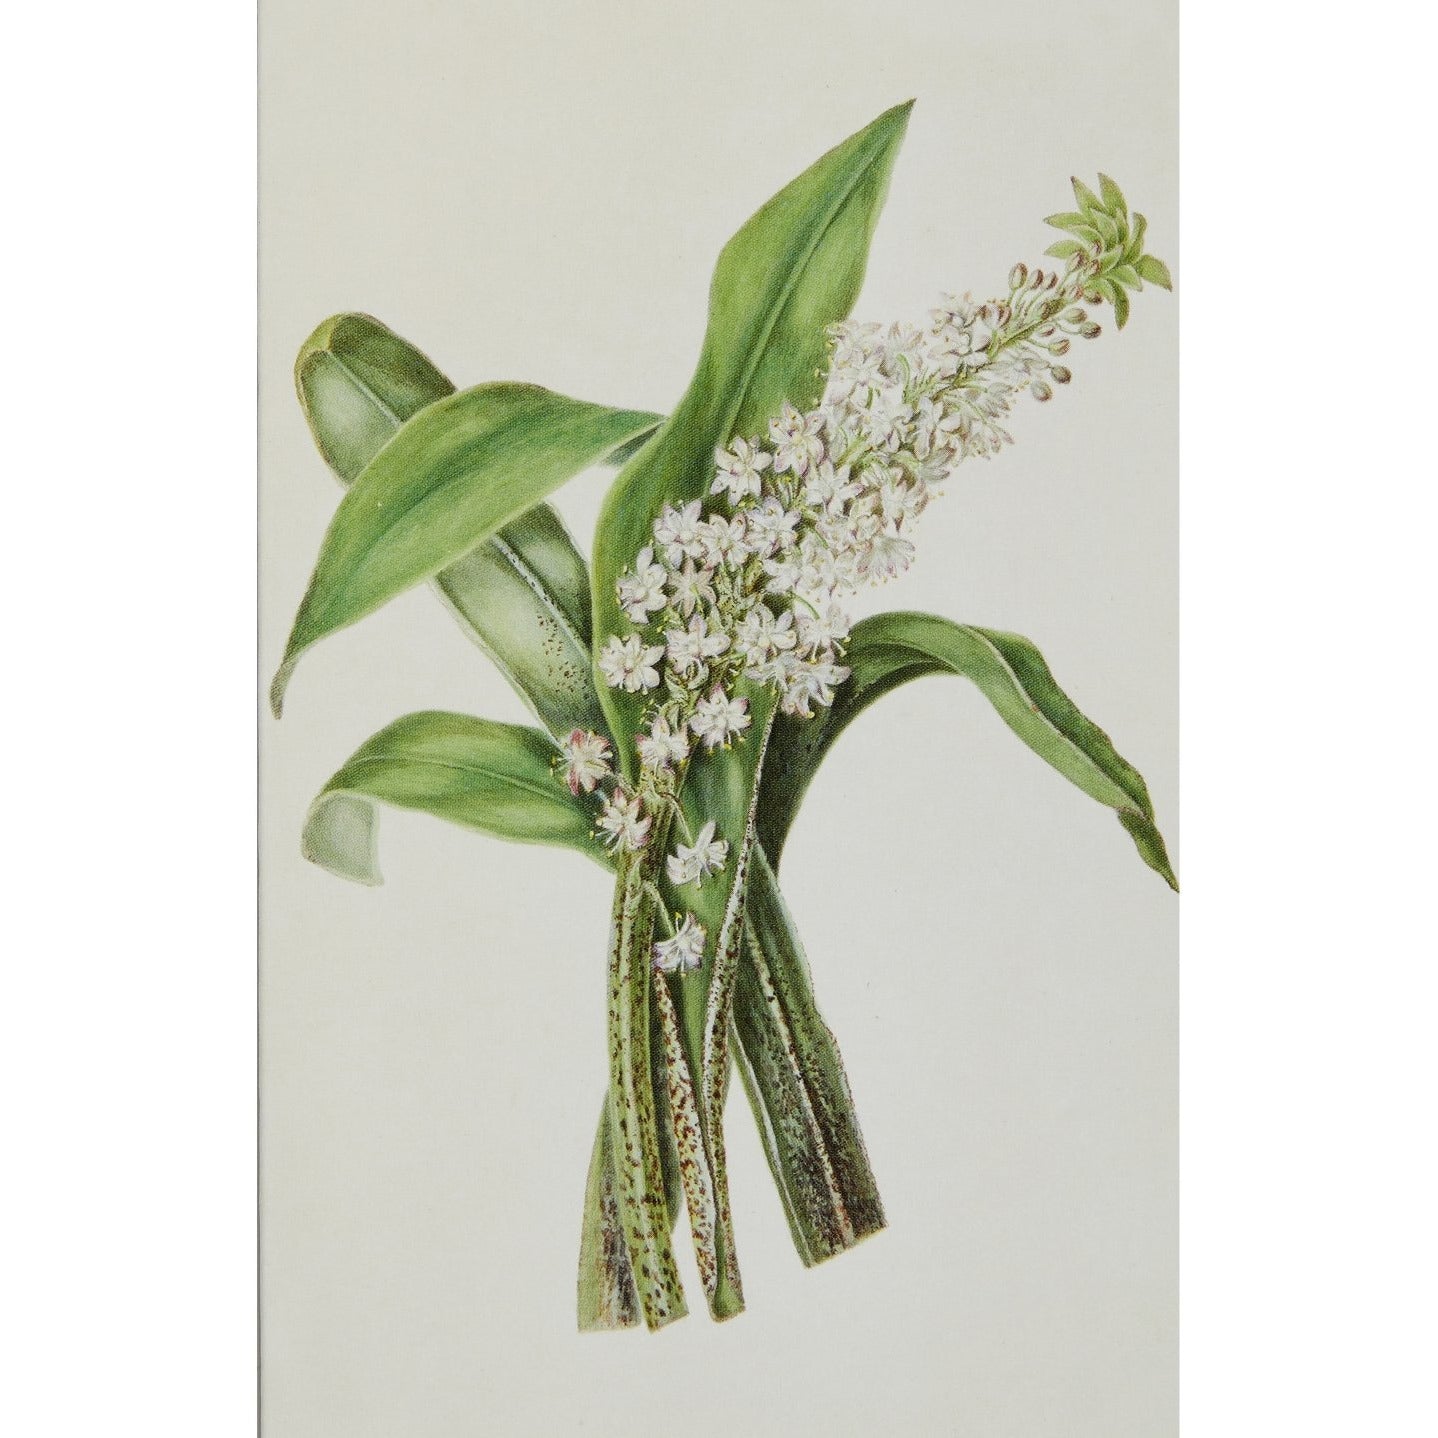 Notecard image - Eucomis punctata by the Hon. Lady Cockerell. From the Broughton collection of the Fitzwilliam Museum, brought to you by CuratingCambridge.co.uk